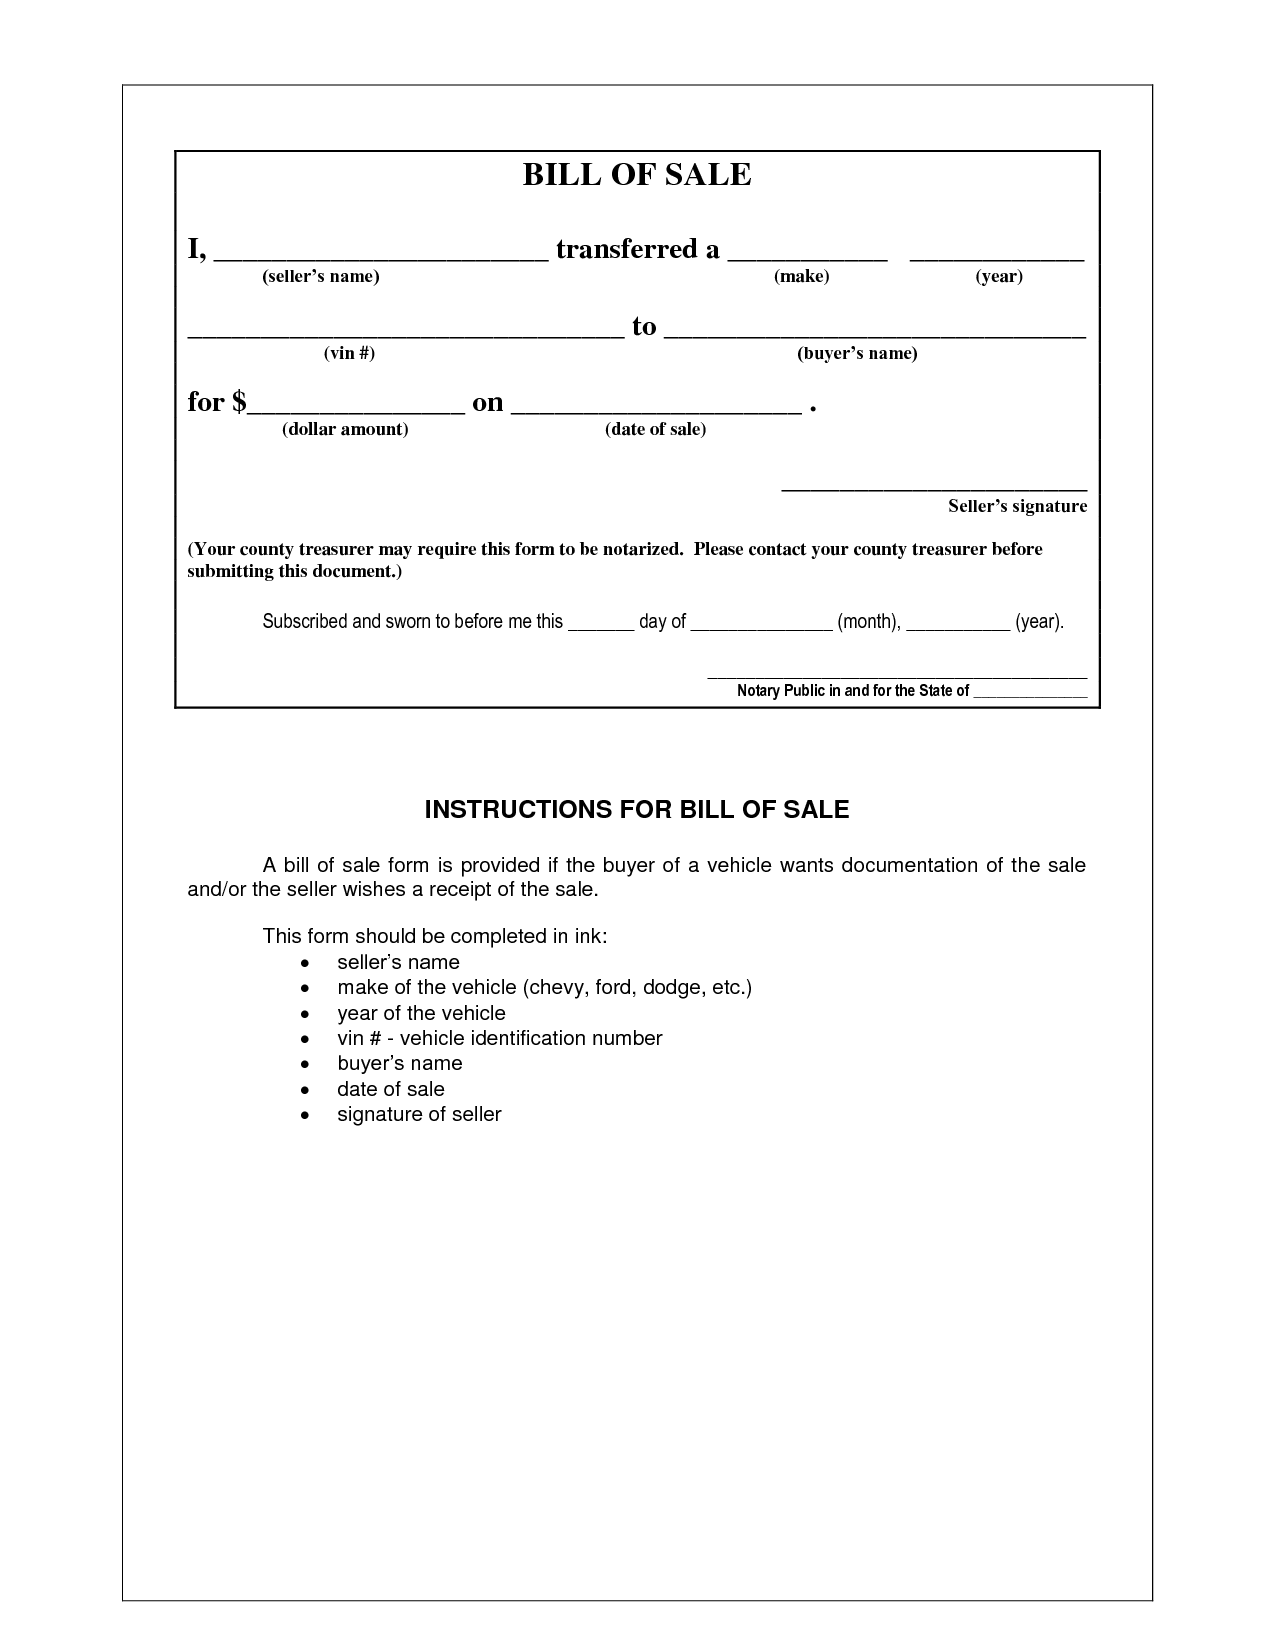 example-of-bill-of-sale-free-printable-documents